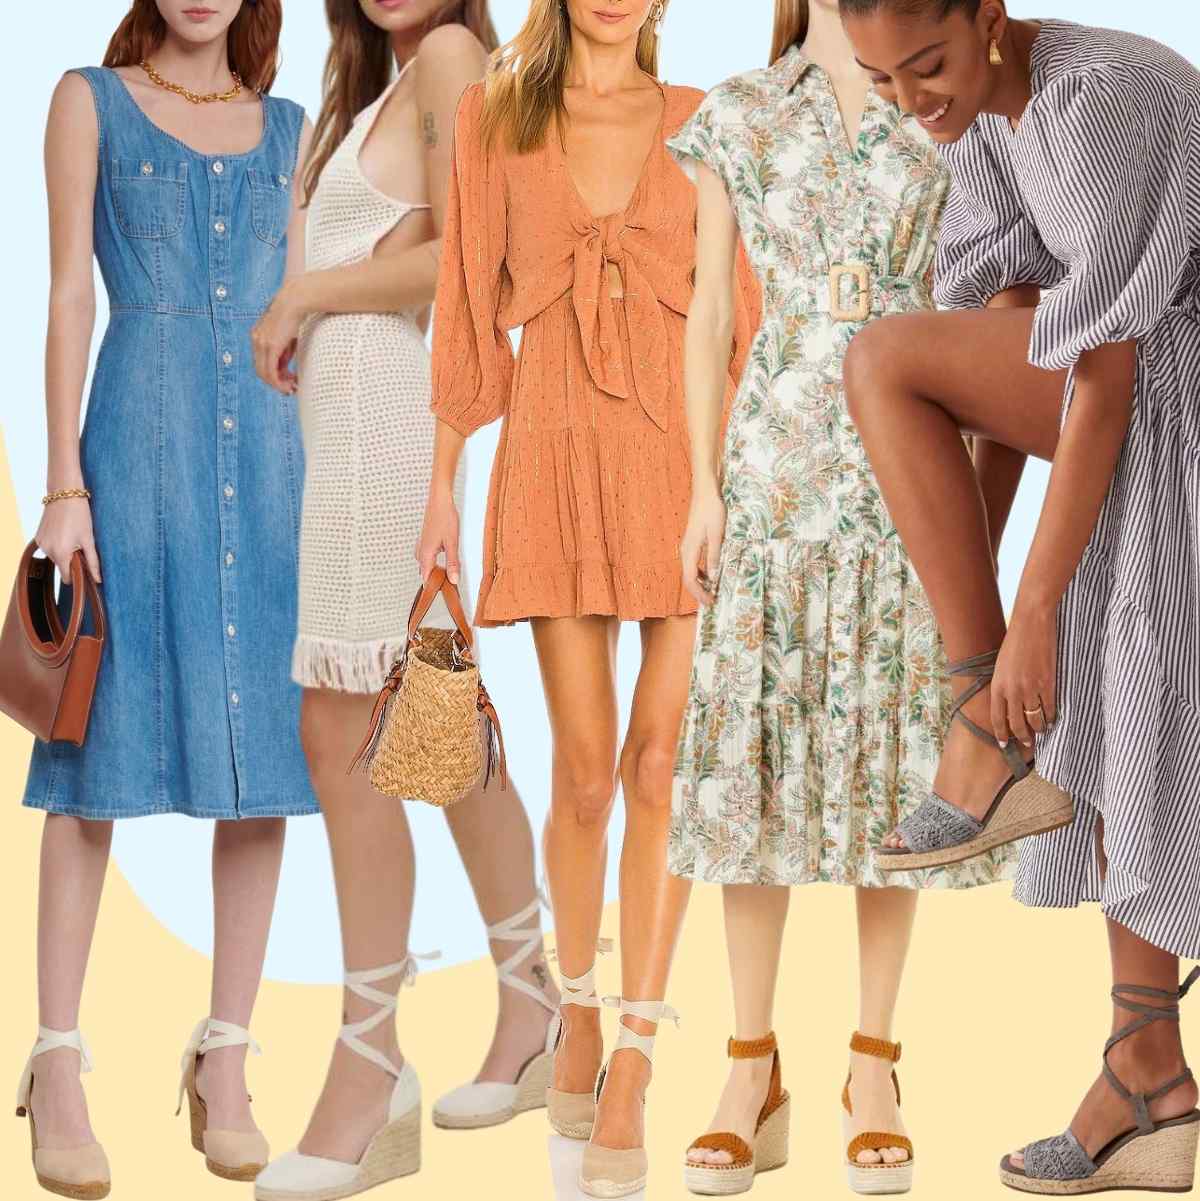 What shoes to wear with short dress - Buy and Slay